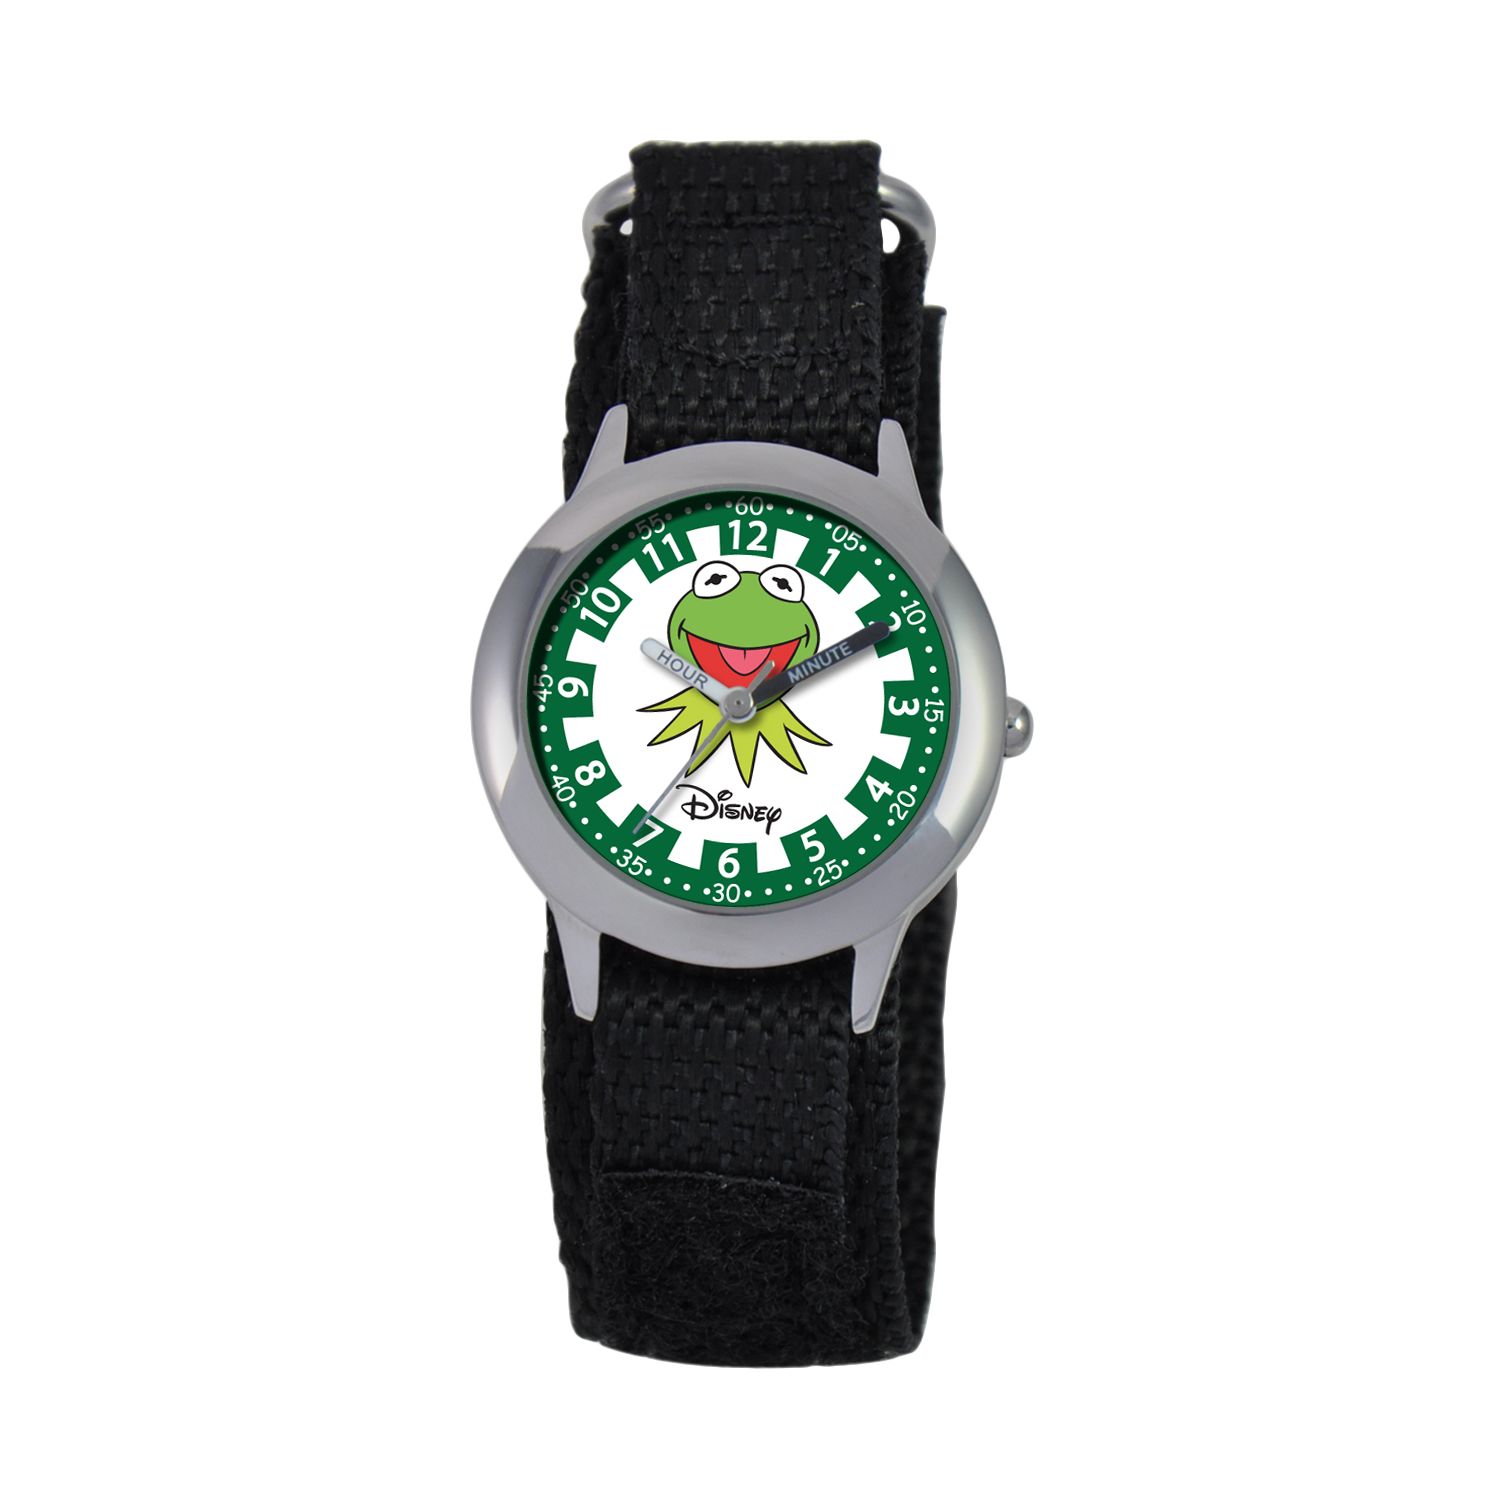 Image for Disney 's The Muppets Kermit the Frog KIds' Time Teacher Watch at Kohl's.